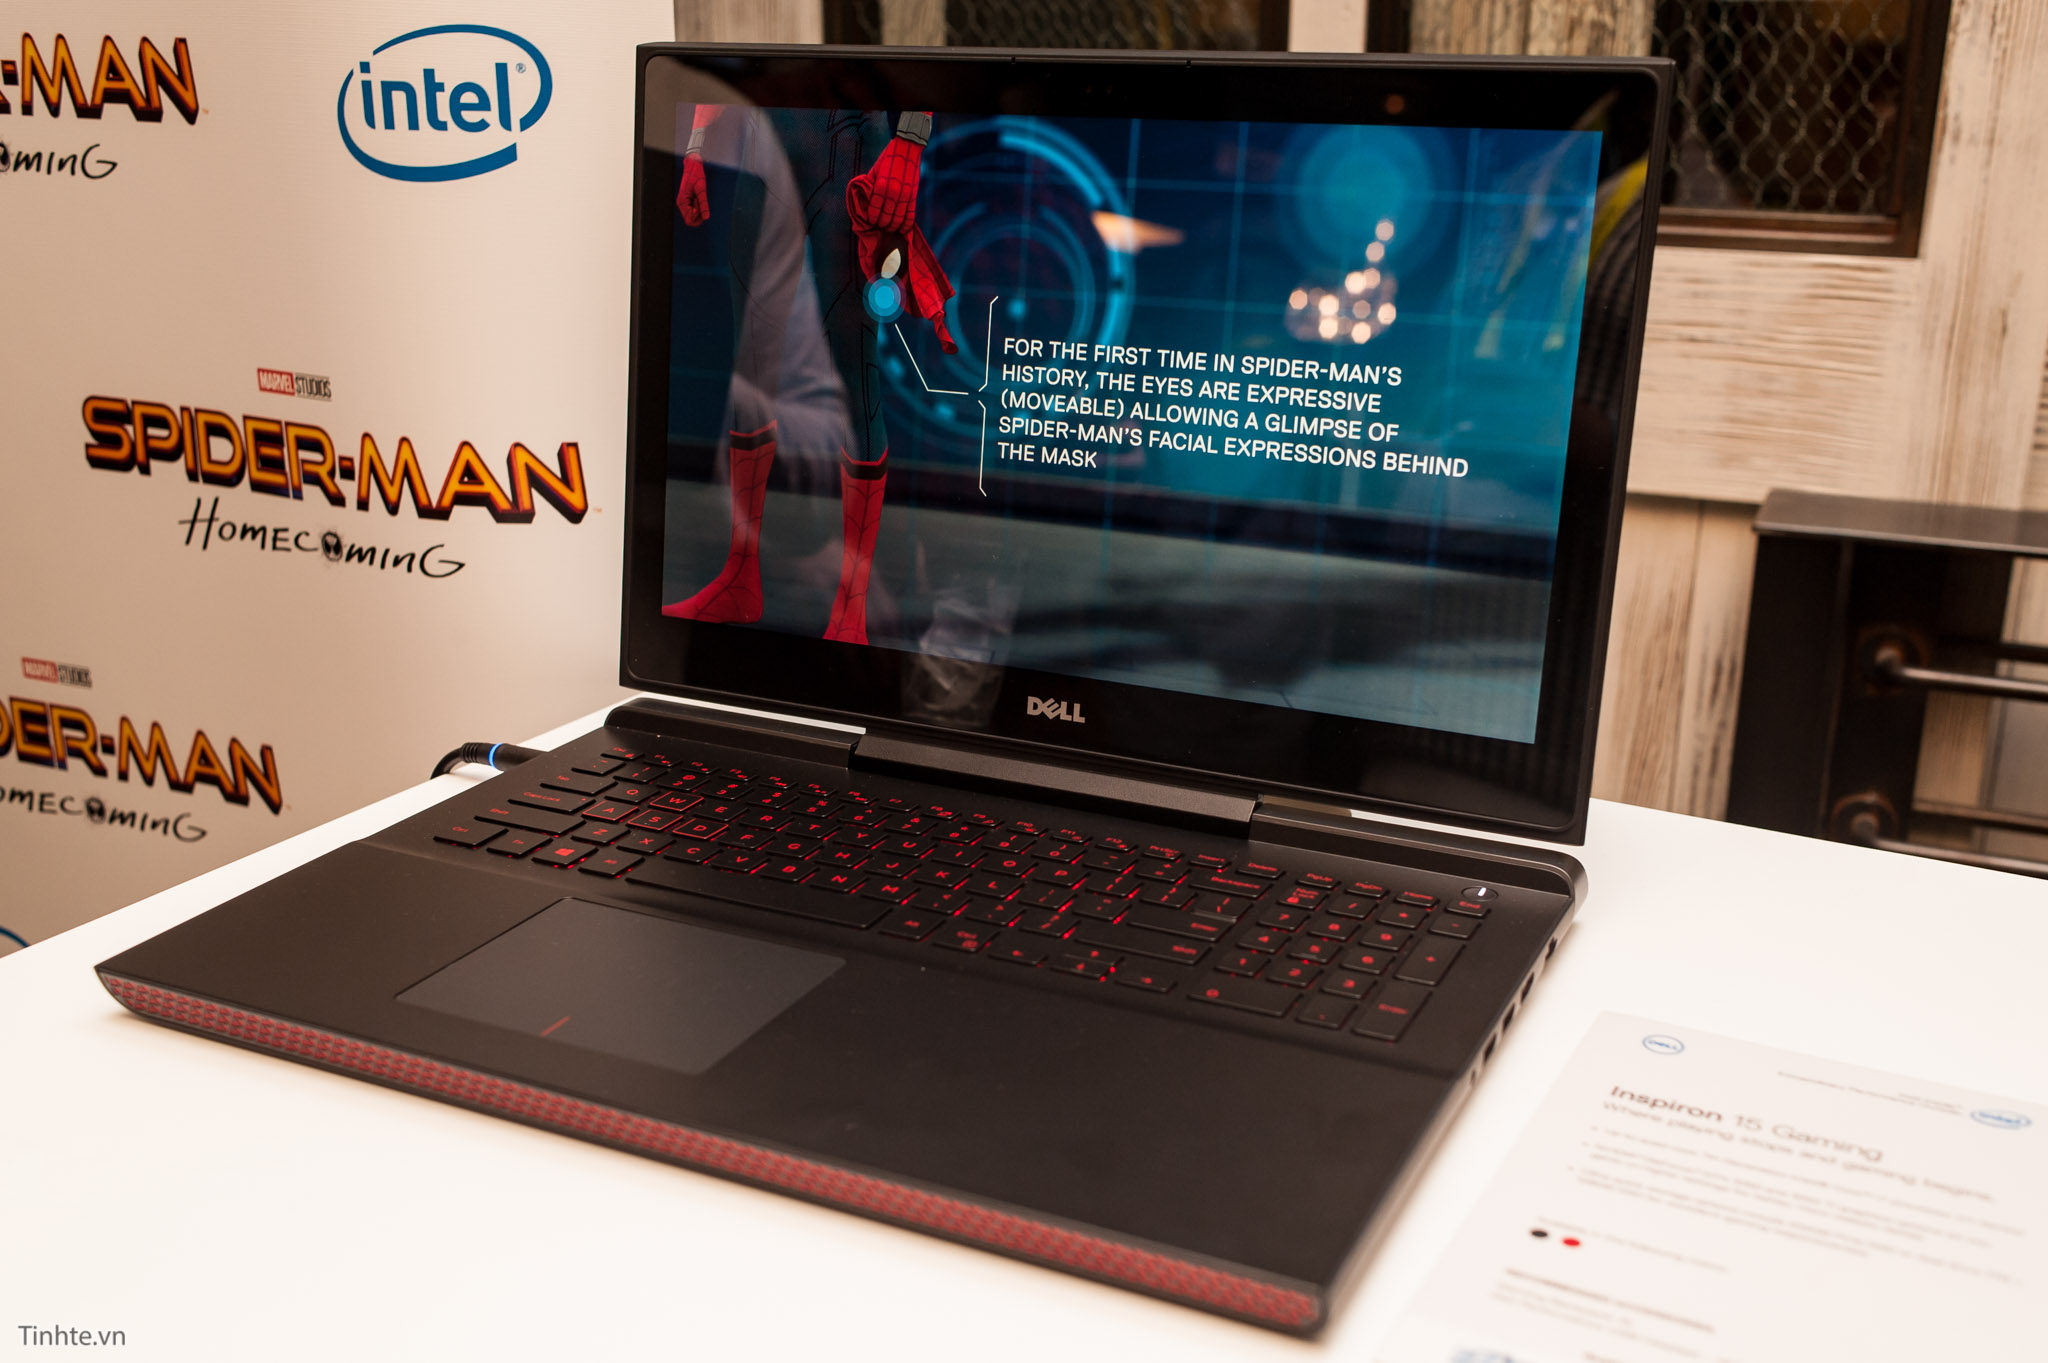 Dell 15 7000 game. Игровой dell Inspiron 15 7000. Dell Inspiron 7567. Ноутбуки dell Inspiron GTX 1050ti. Dell Inspiron 15 Gaming 7567.